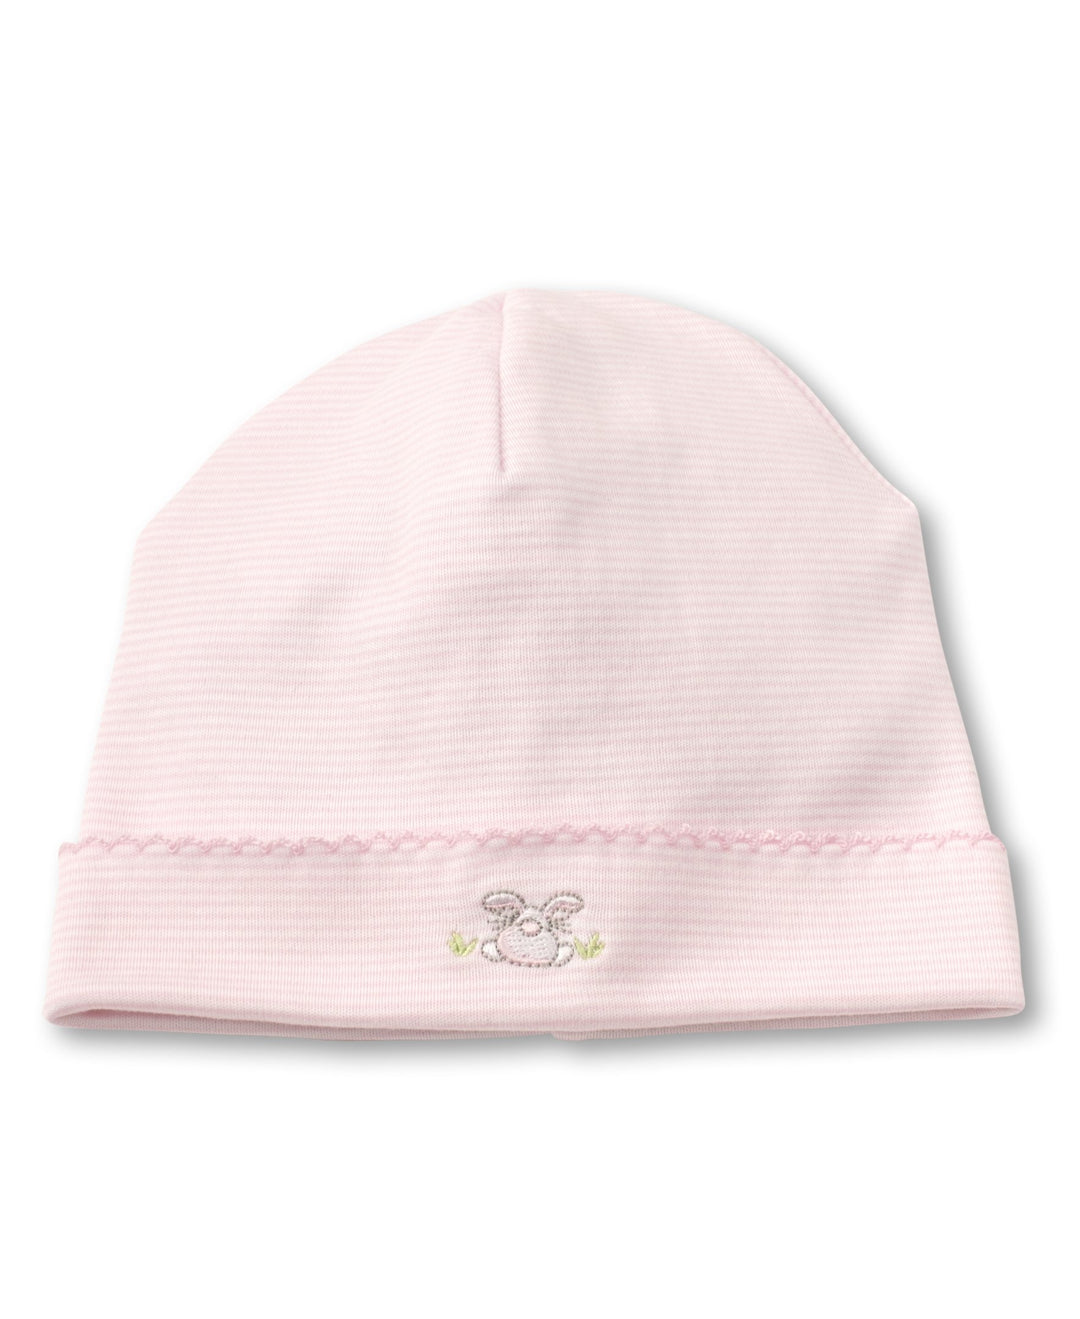 BUNNY BUZZ BABY HAT IN PINK